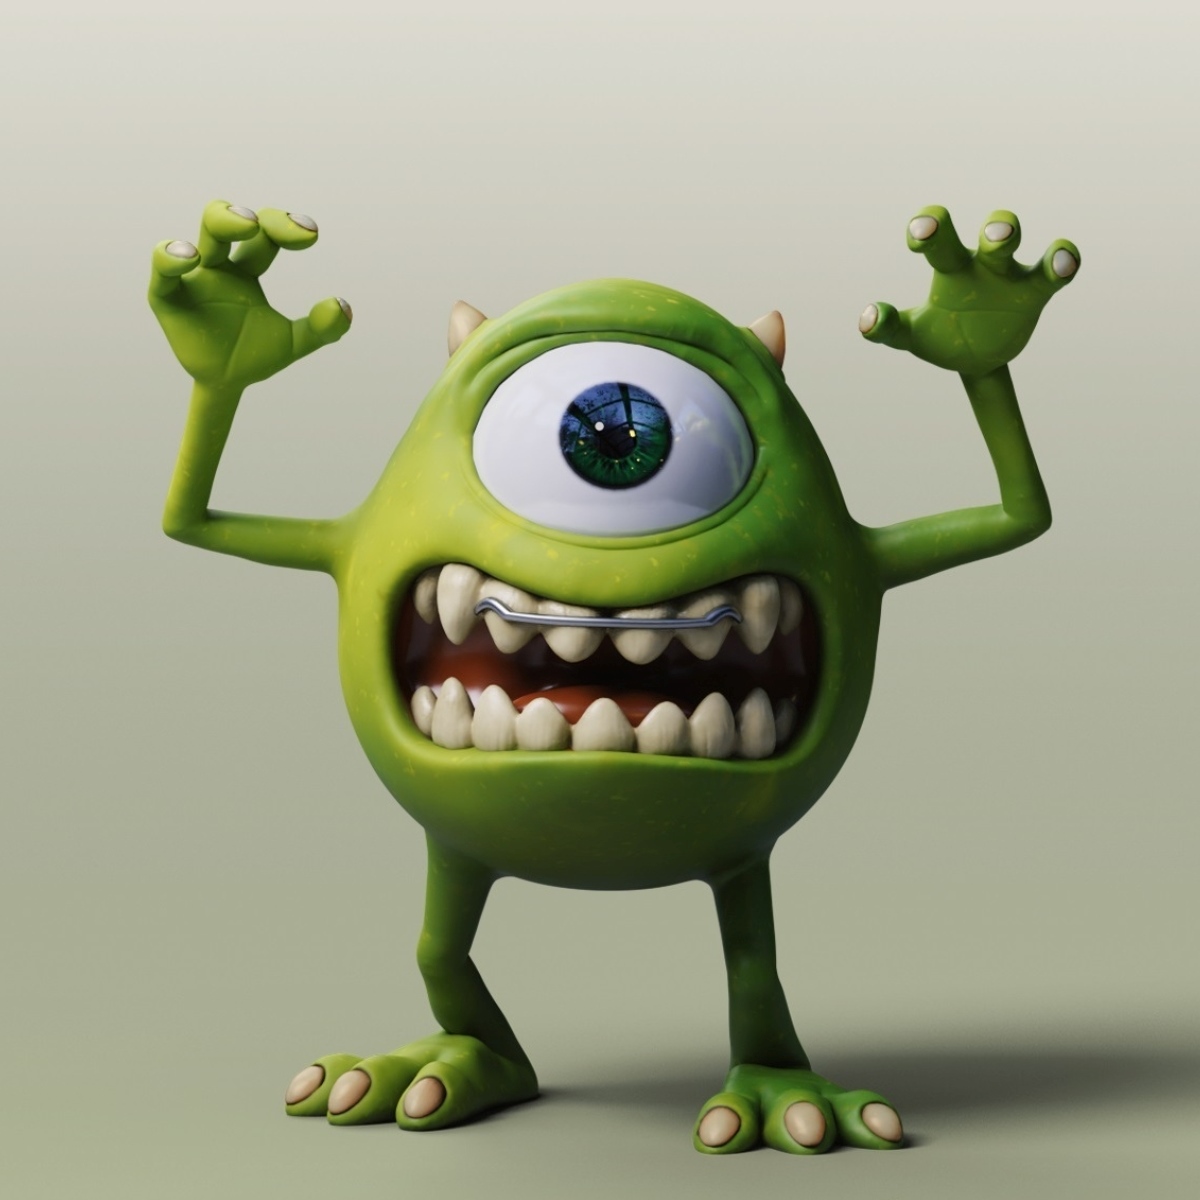 12 Facts About Mike Wazowski (Monsters, Inc.) 